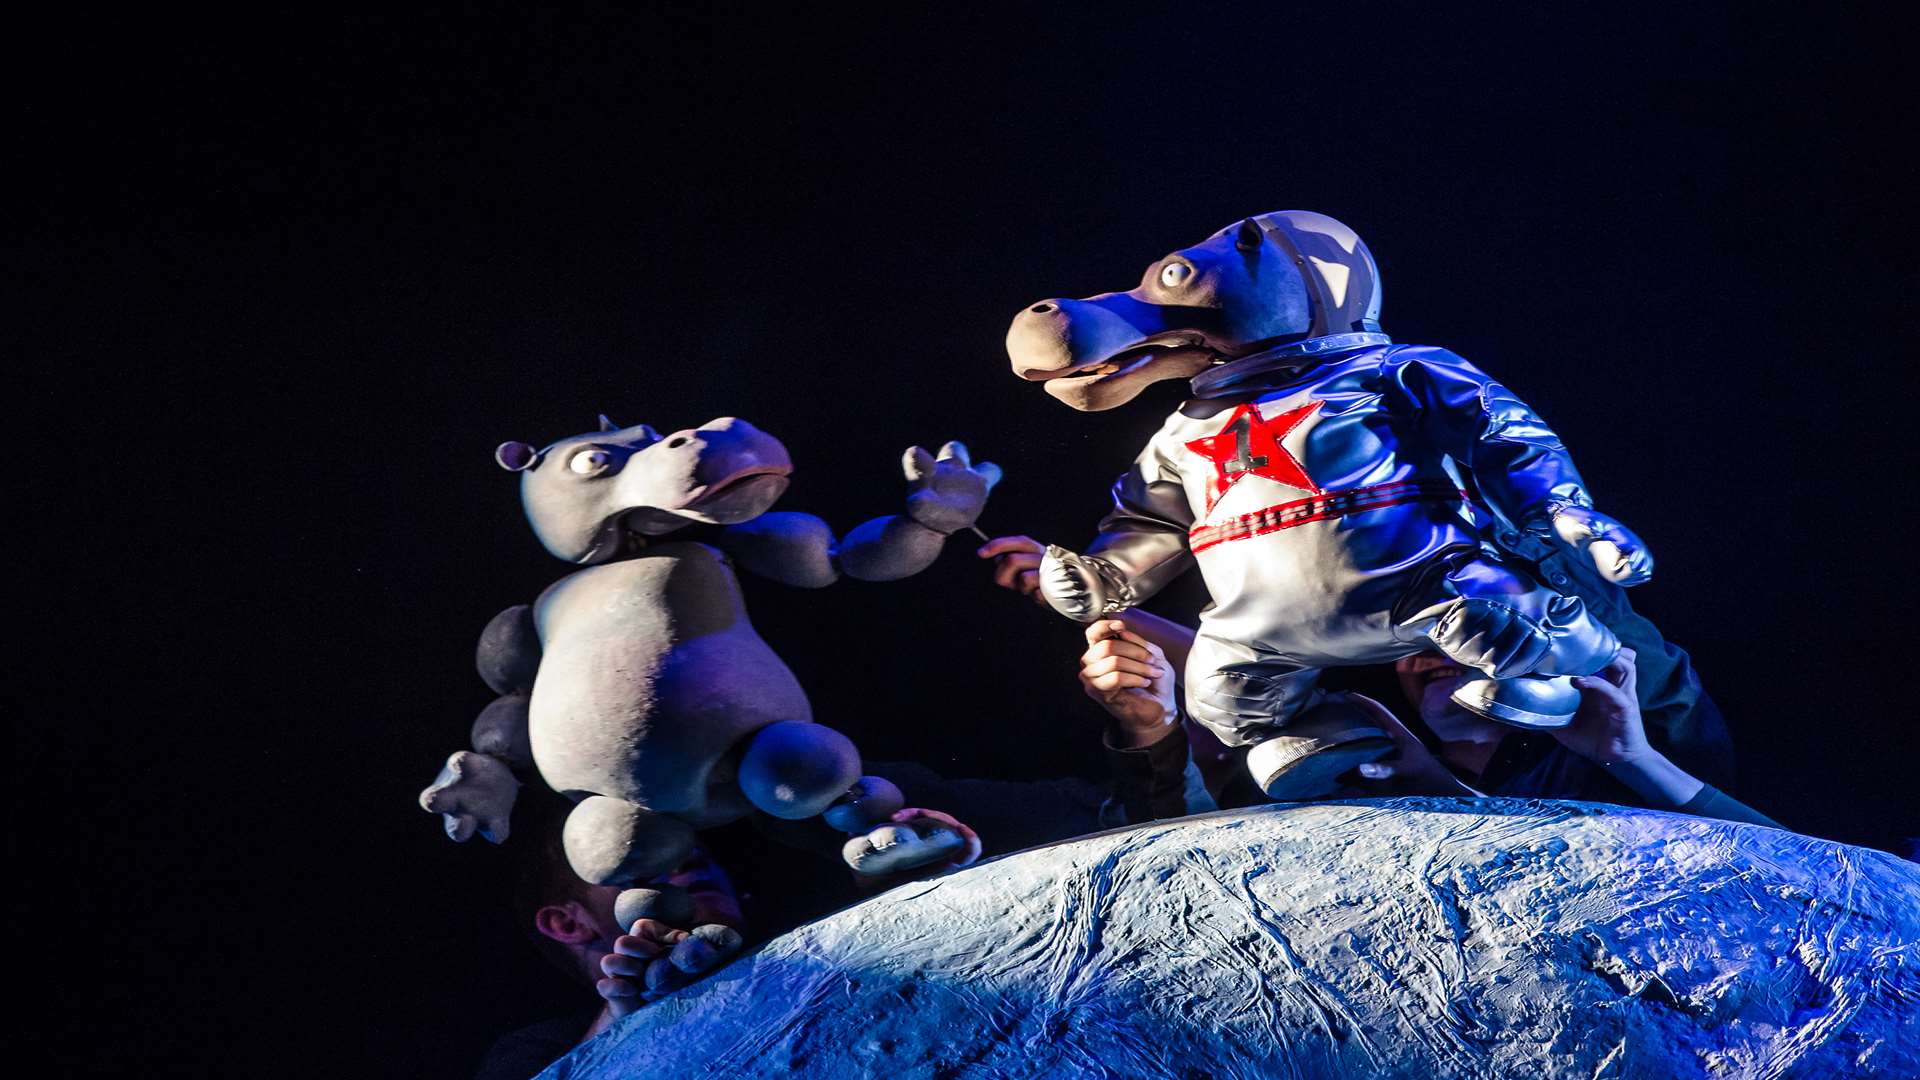 Catch the hippo landings for yourself in the First Hippo on the Moon